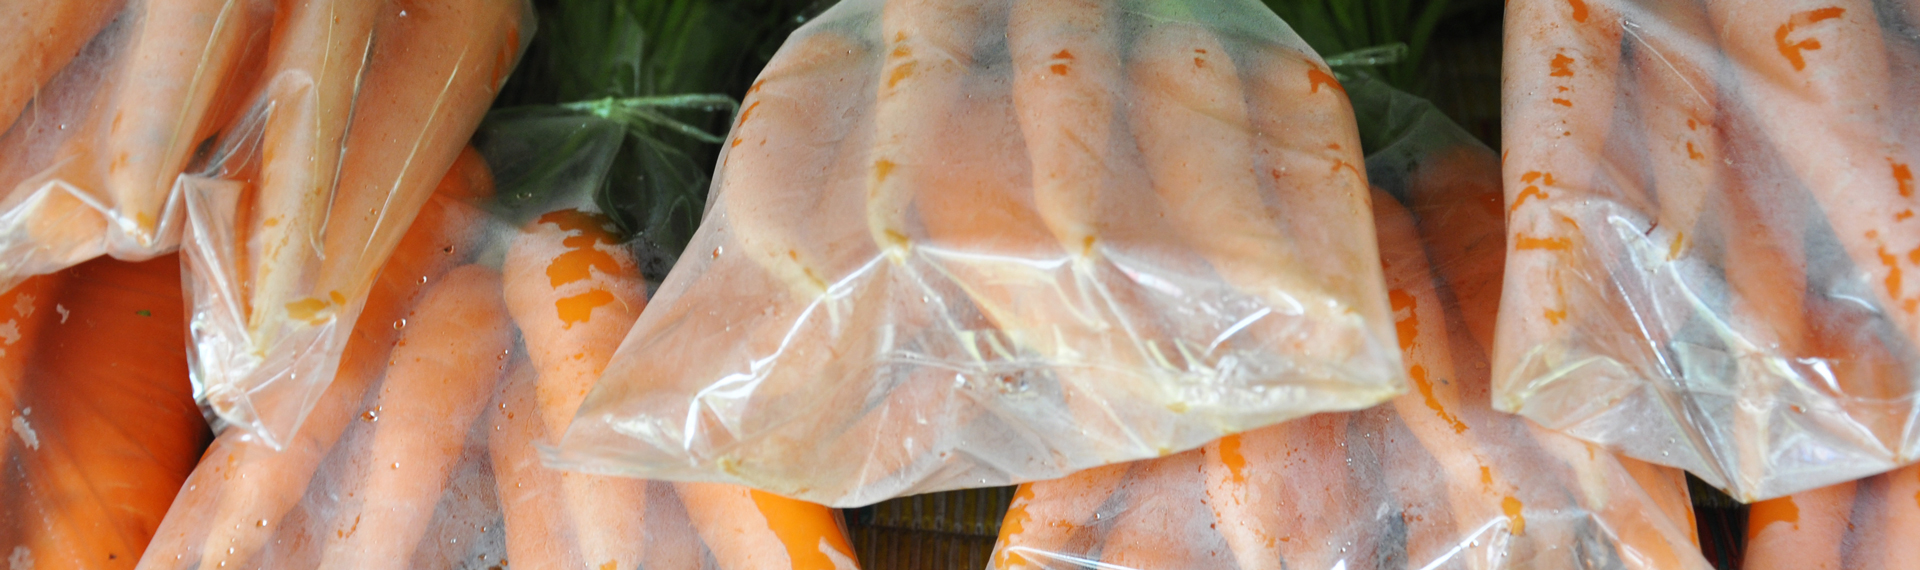 fresh carrot in poly bags